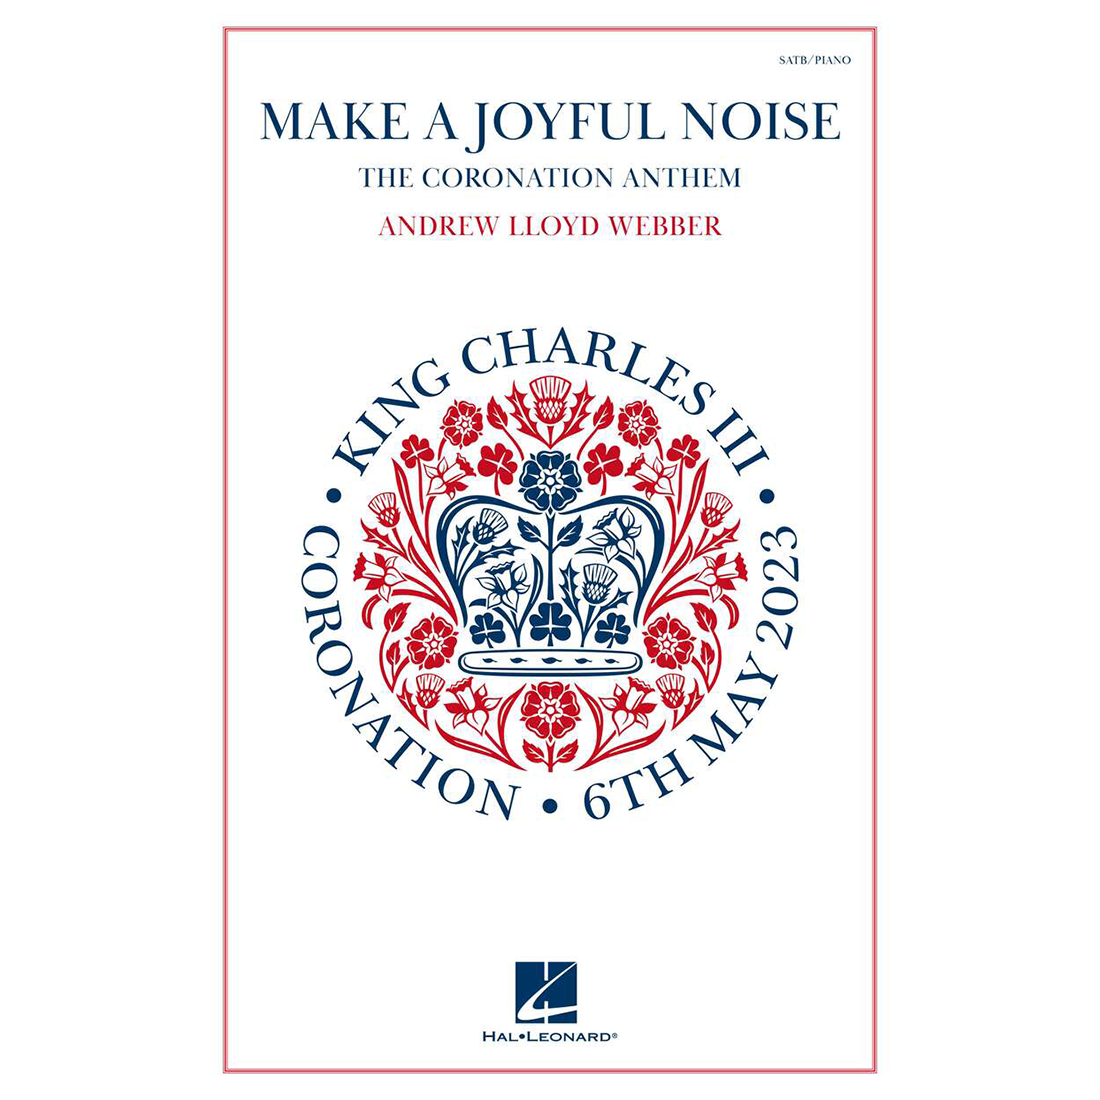 Andrew Lloyd Webber, Royal Philharmonic Orchestra, The Choir Of Westminster Abbey, Fanfare Trumpeters Of The Royal Air Force - Make A Joyful Noise official sheet music (SATB + Piano)